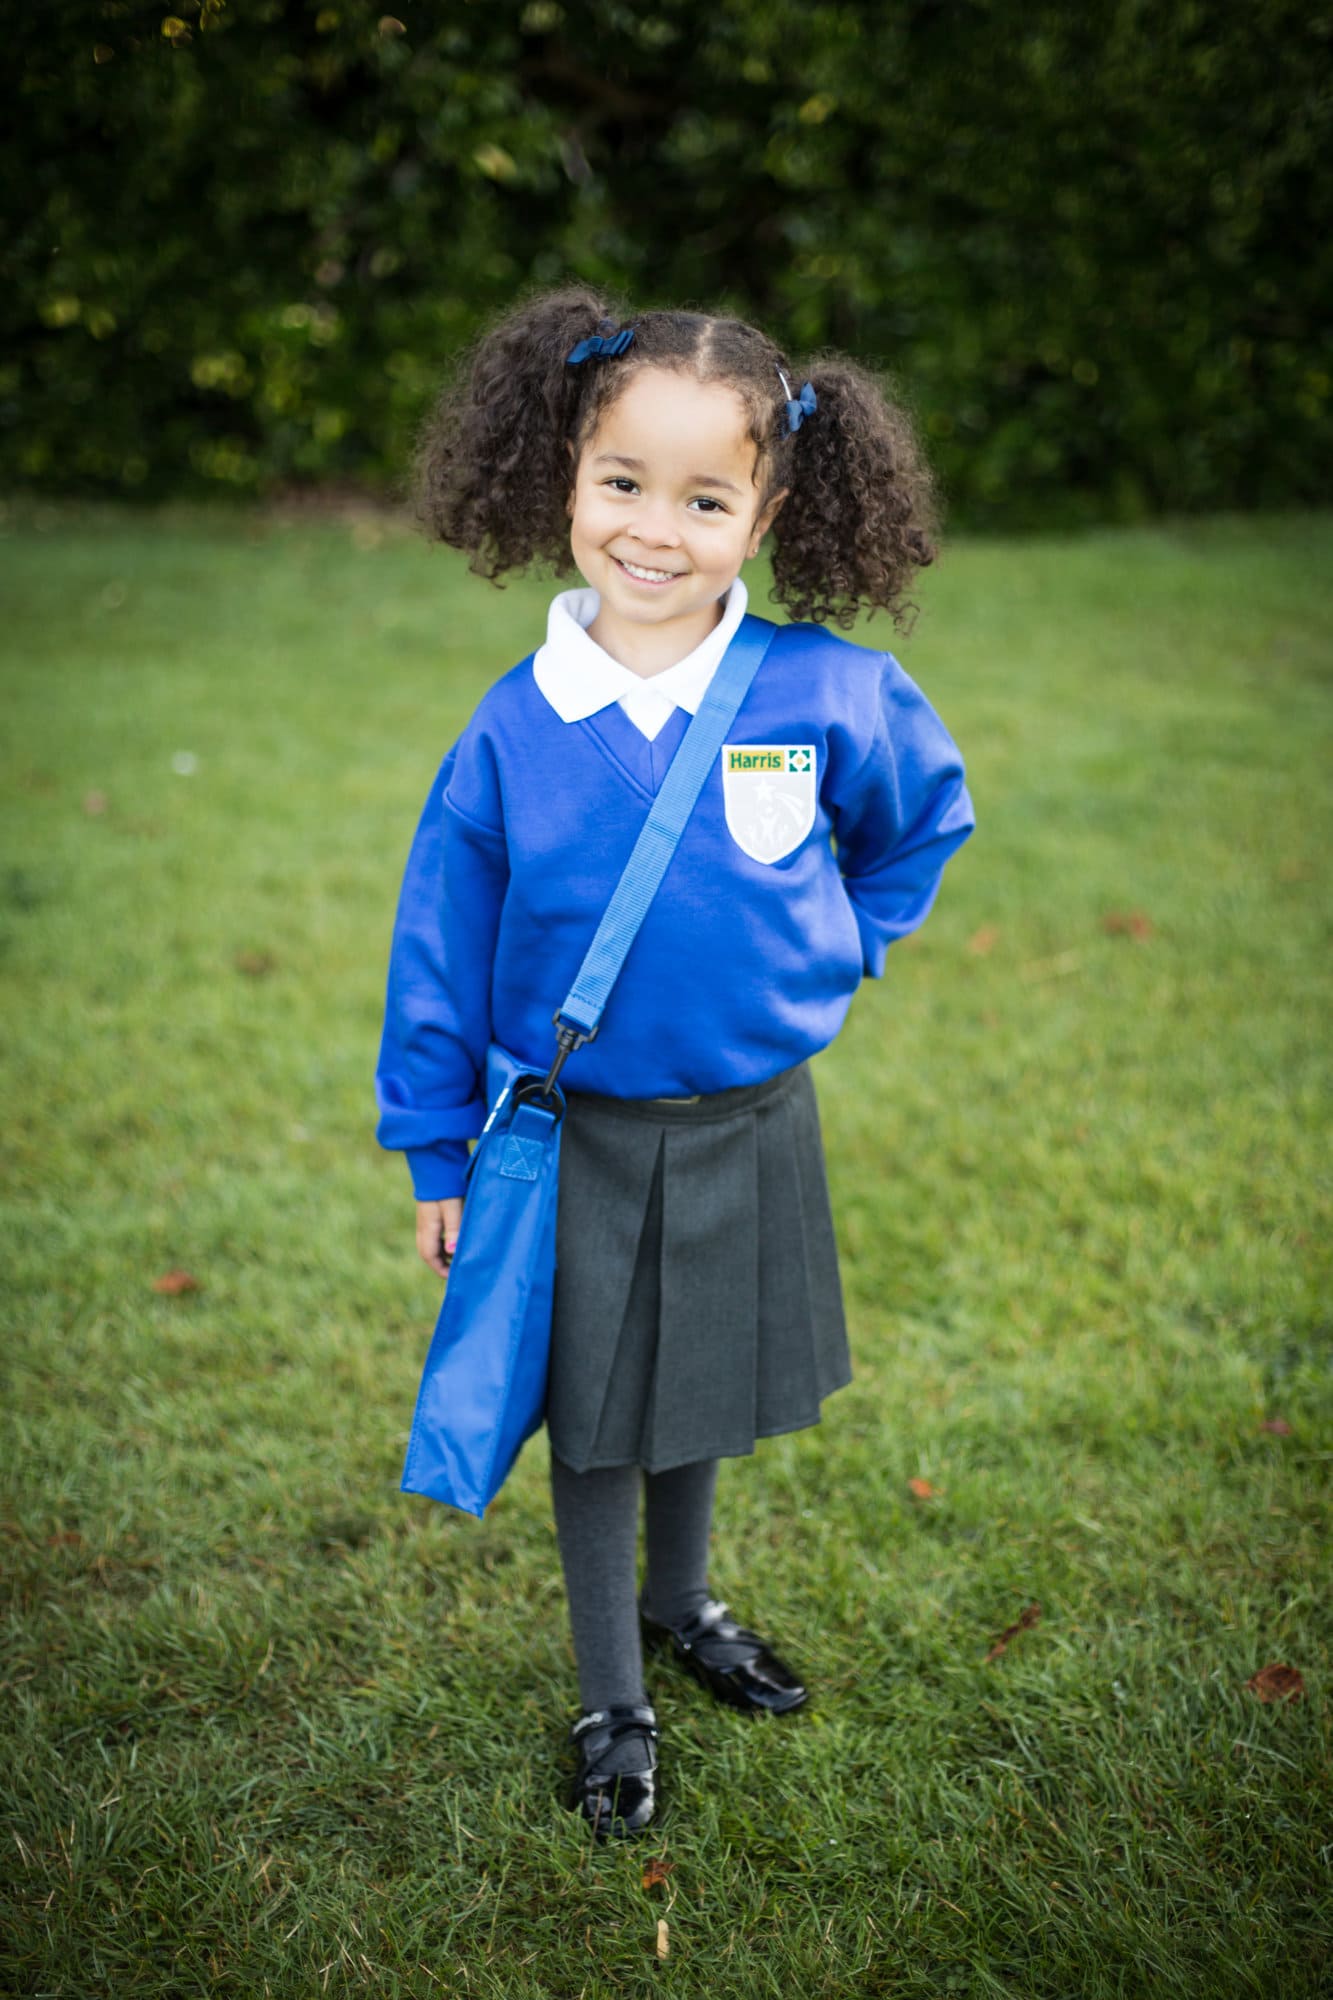 Tips for your Back to School Photos